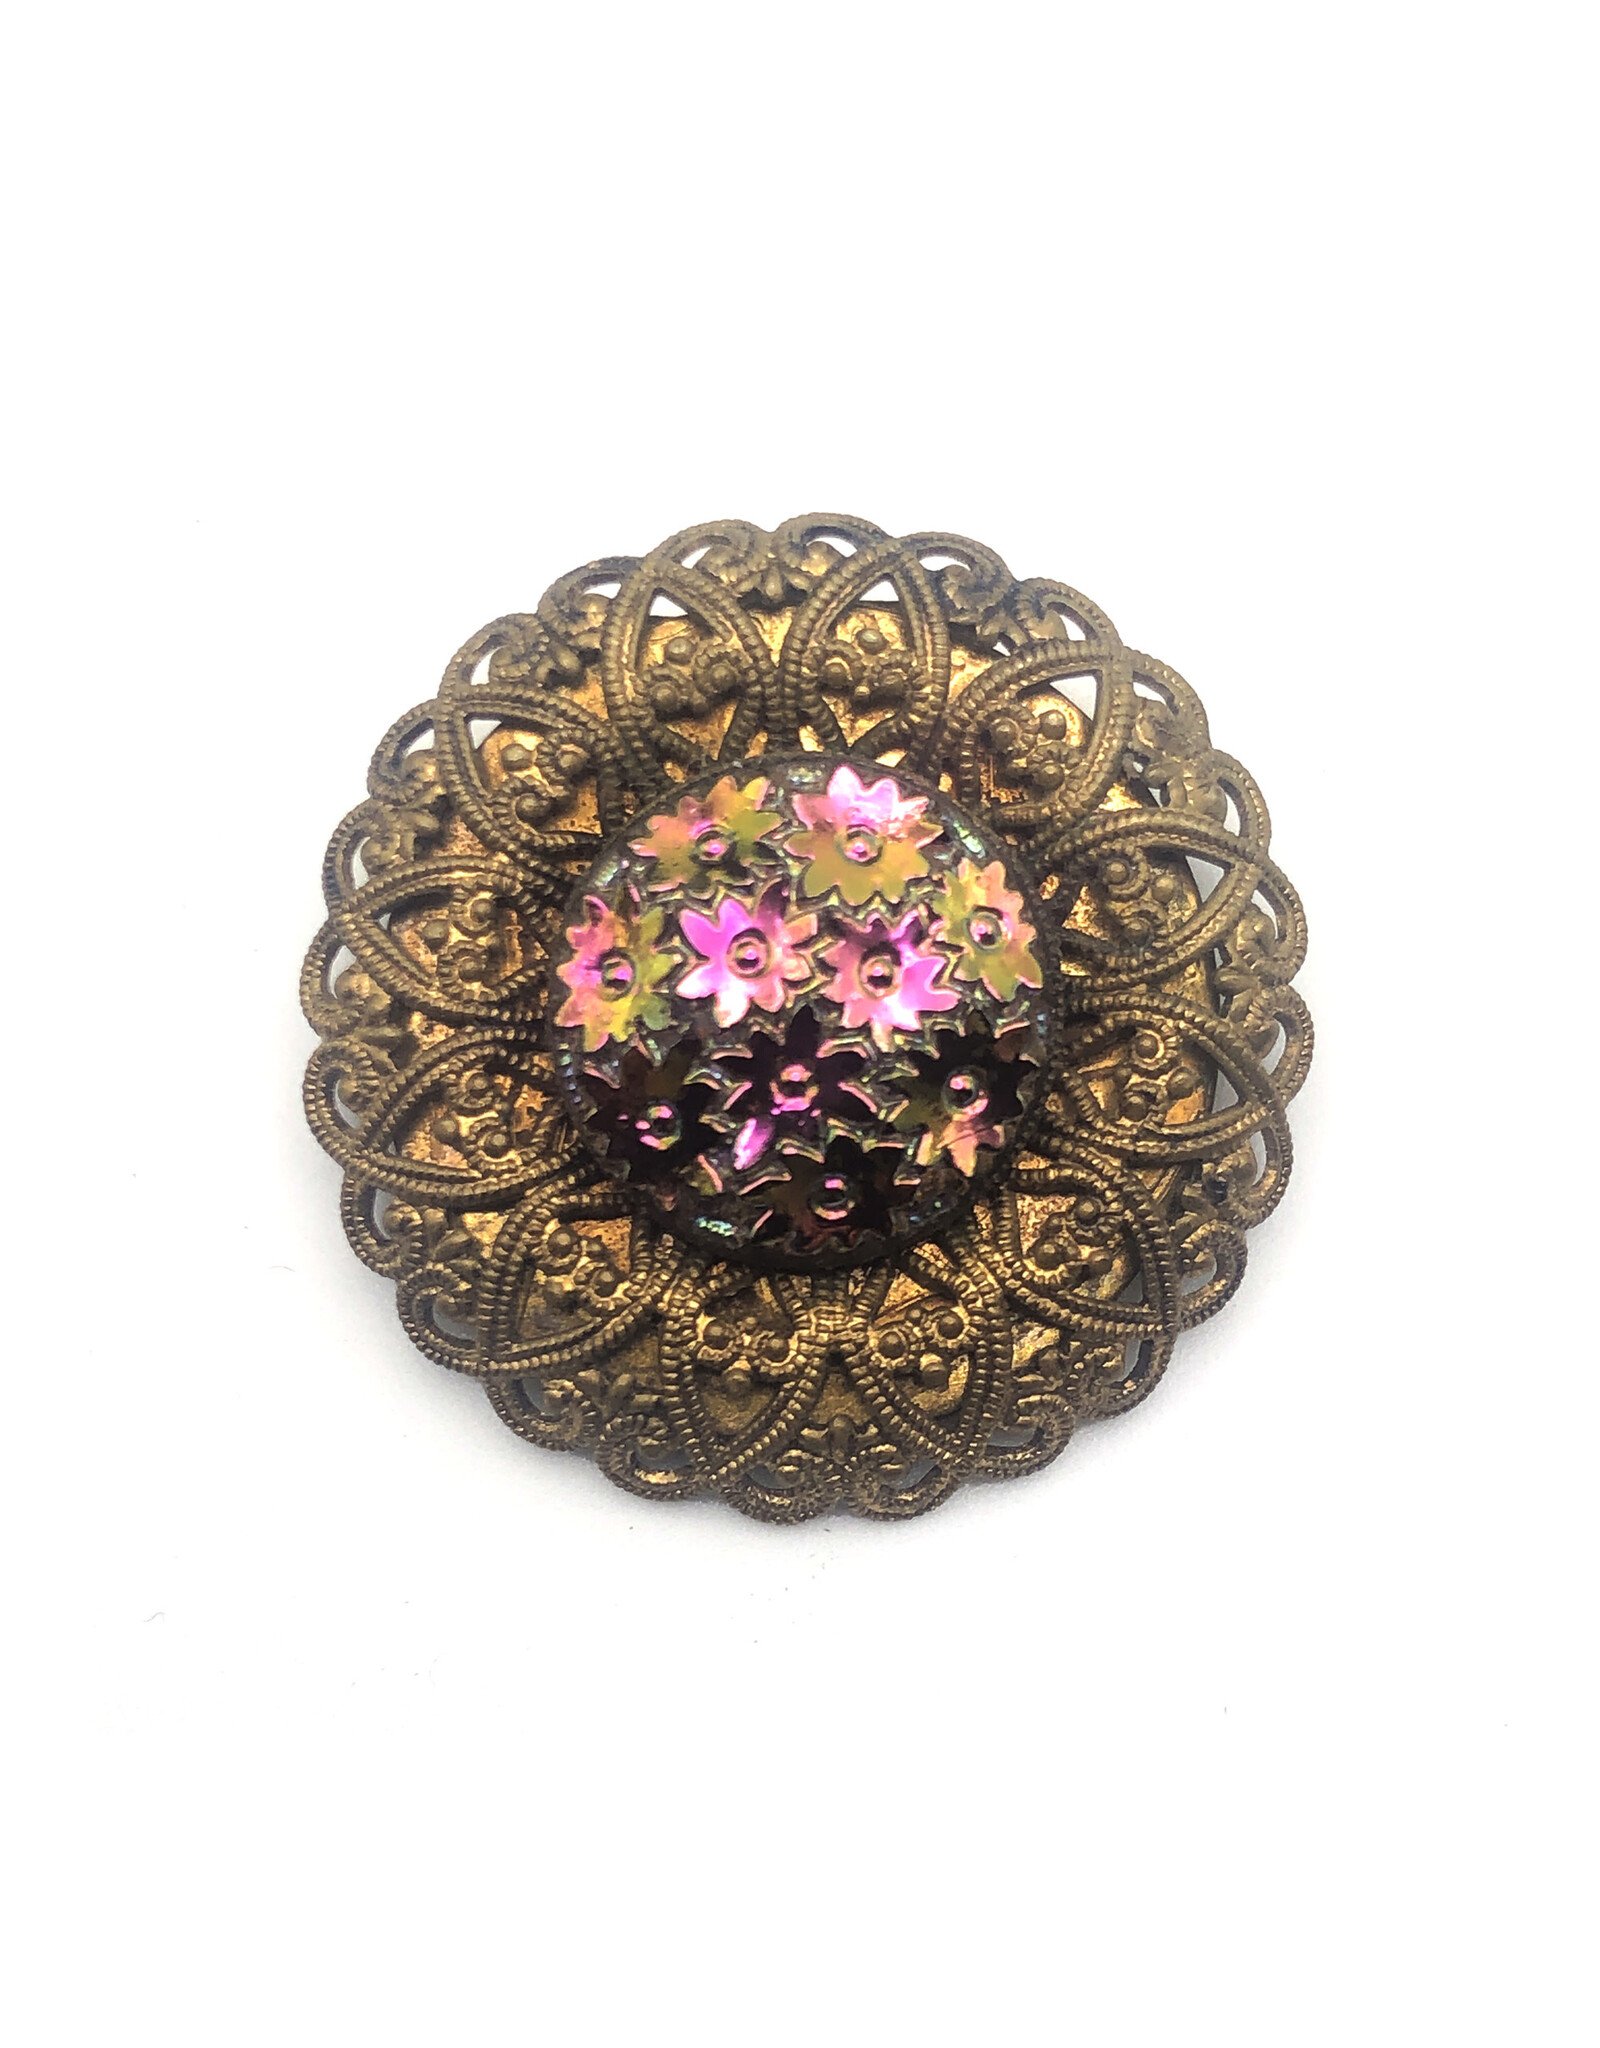 Vintage Rondel Scarf Clip with Iridescent Flower Bunch in Center